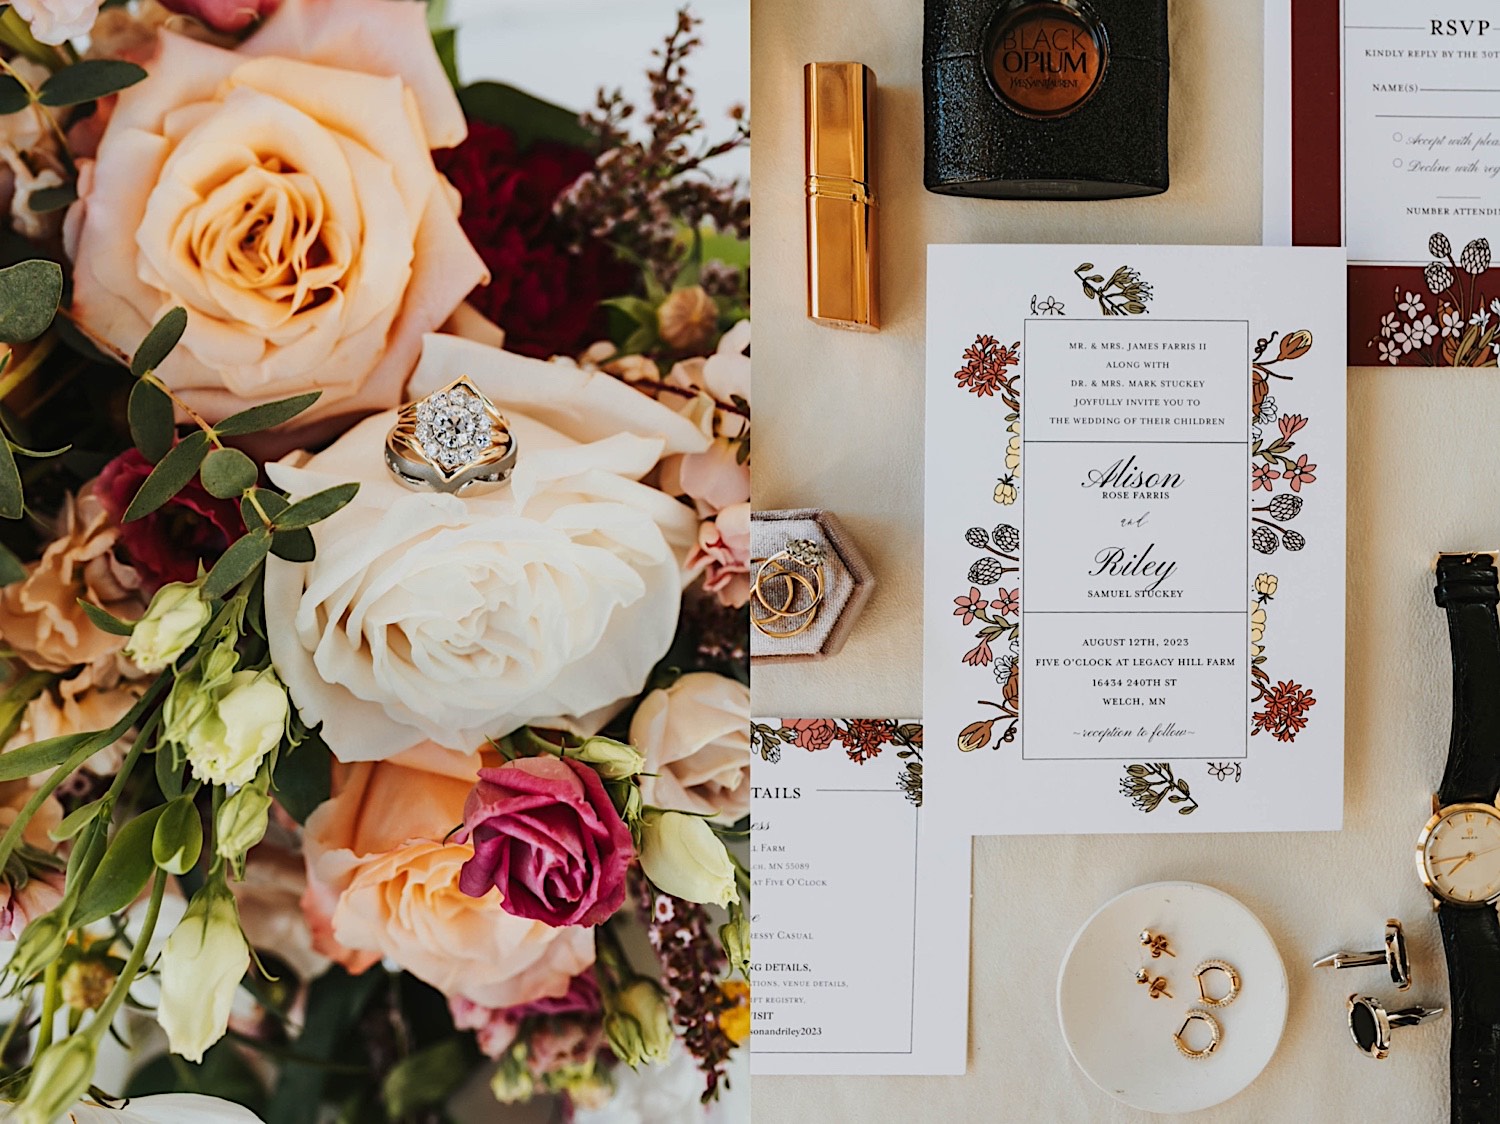 2 photos side by side, the left is of a wedding ring resting on a flower that is part of a bouquet, the right is a wedding day flatlay